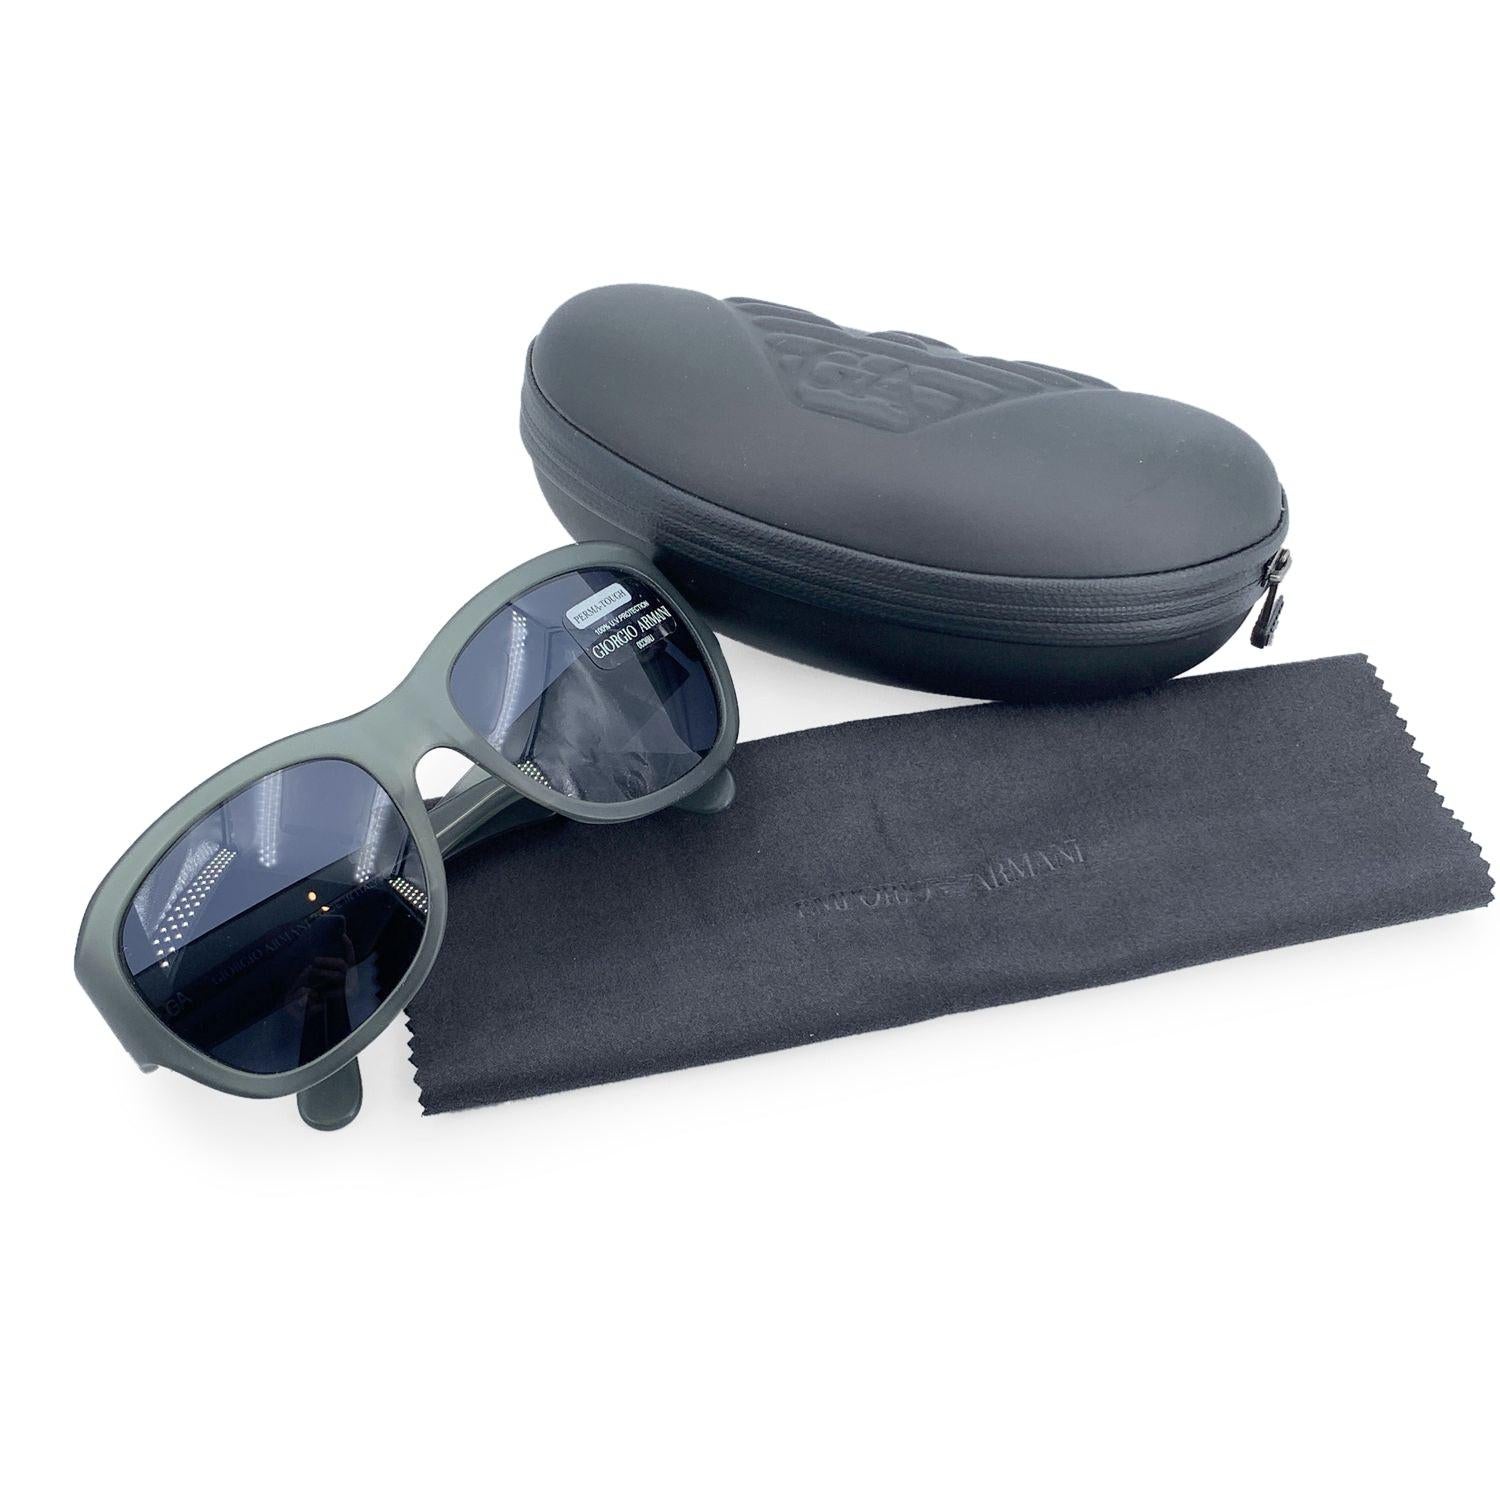 Vintage Giorgio Armani Sunglasses, Mod. 842 - 166-S/61 - 125. Grey acetate rounded square shaped frame. Blue Perma-Tough lenses with 100% UV protection. Made in Italy. Details MATERIAL: Plastic COLOR: Grey MODEL: 842 GENDER: Unisex Adults COUNTRY OF